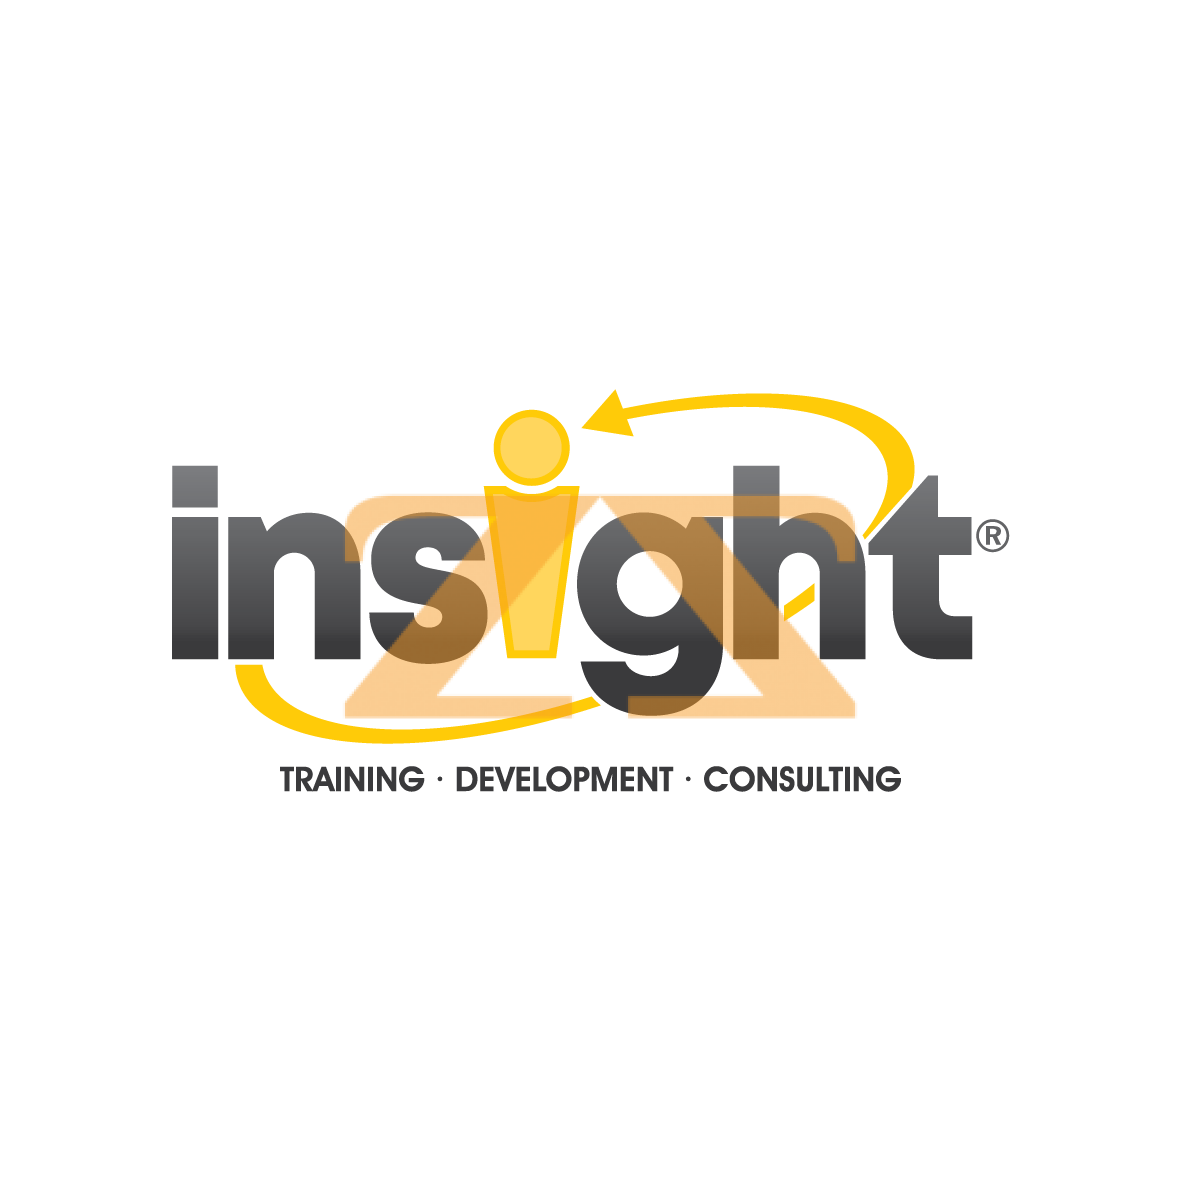 Insight for training and consulting